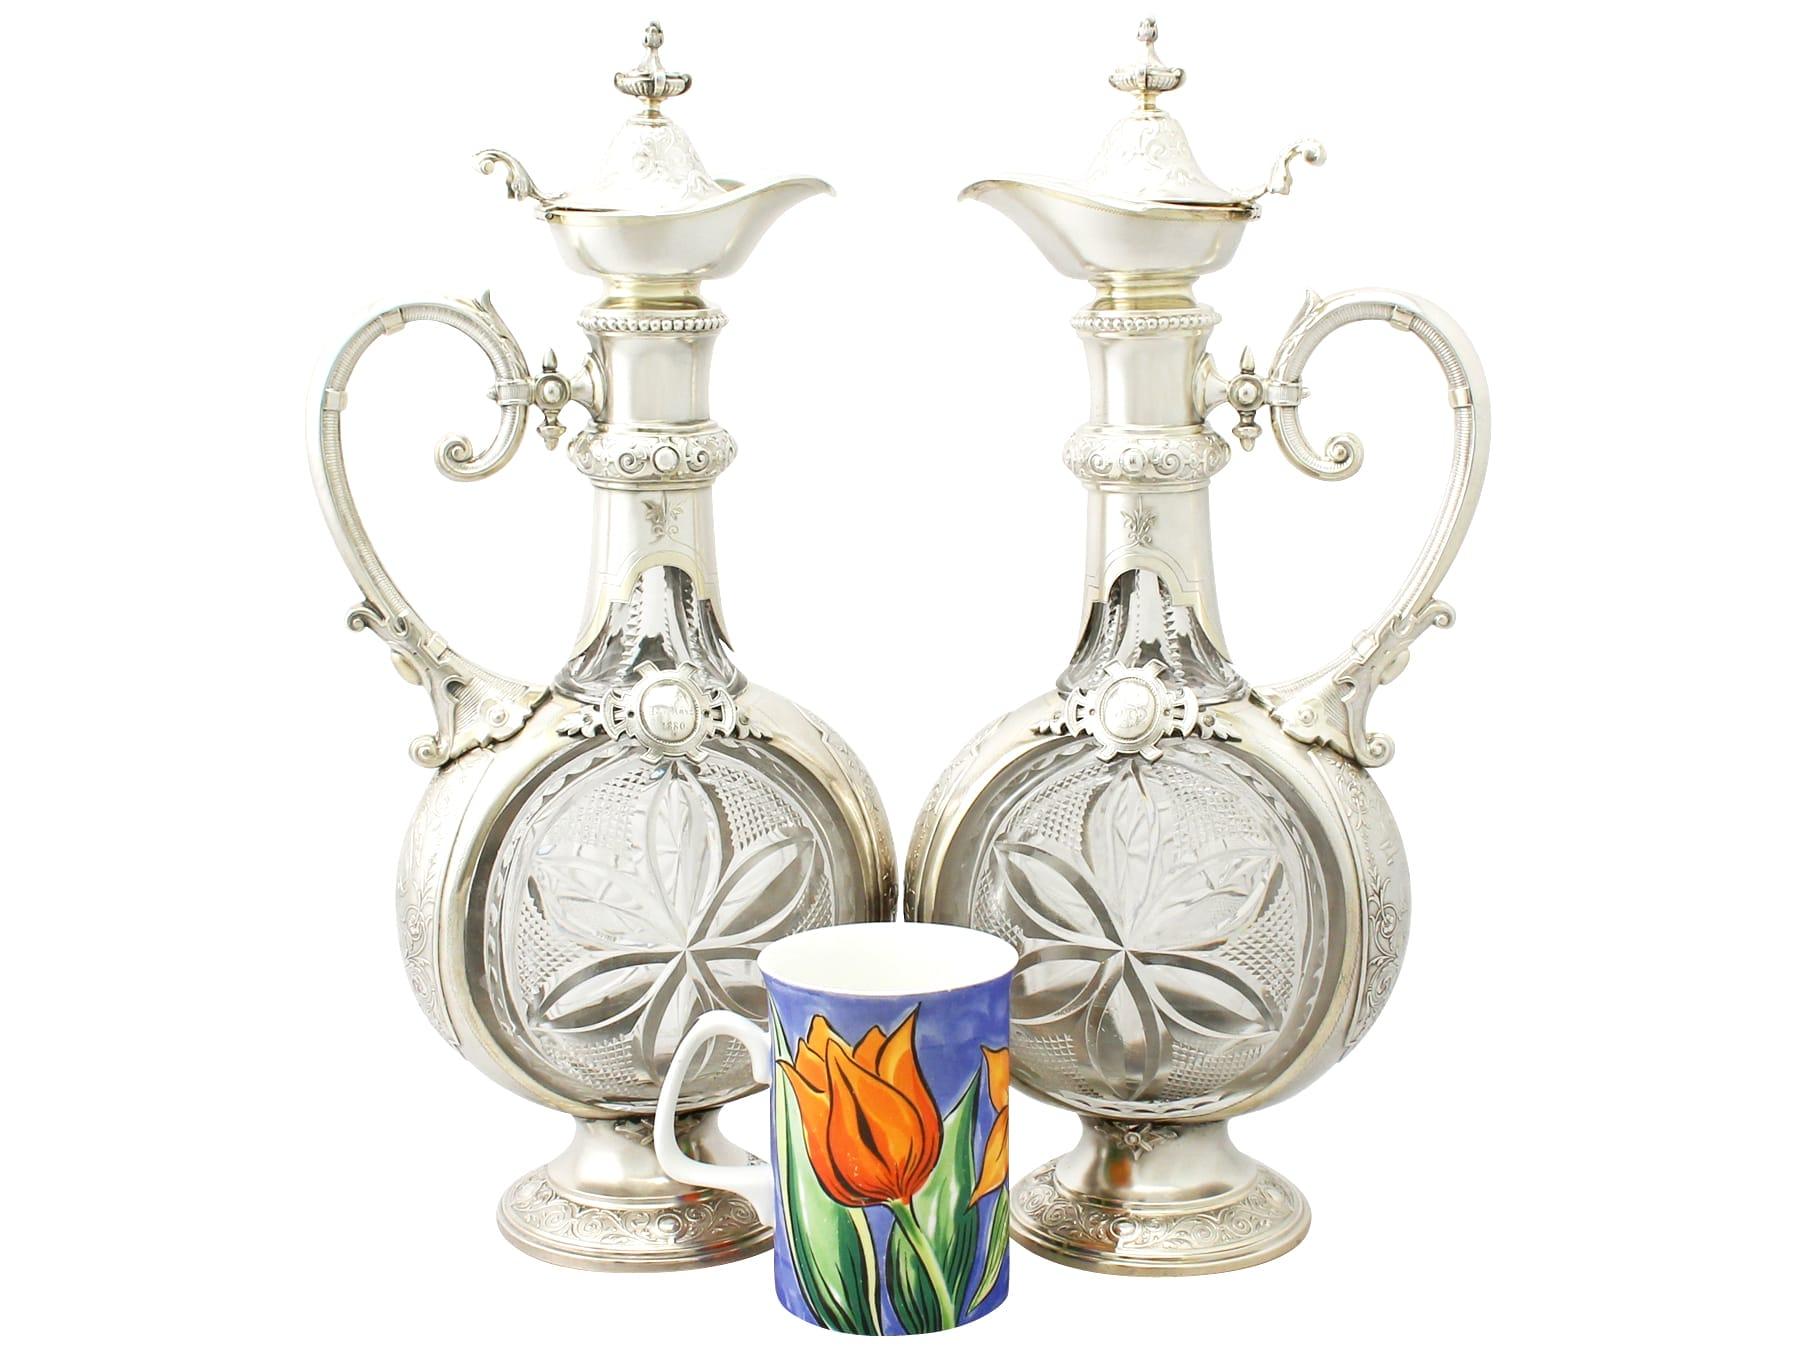 A magnificent, fine and impressive pair of antique German silver and cut glass claret jugs; an addition to our wine and drinks related silverware collection.

These magnificent antique German silver and glass claret jugs have a moon flask shaped